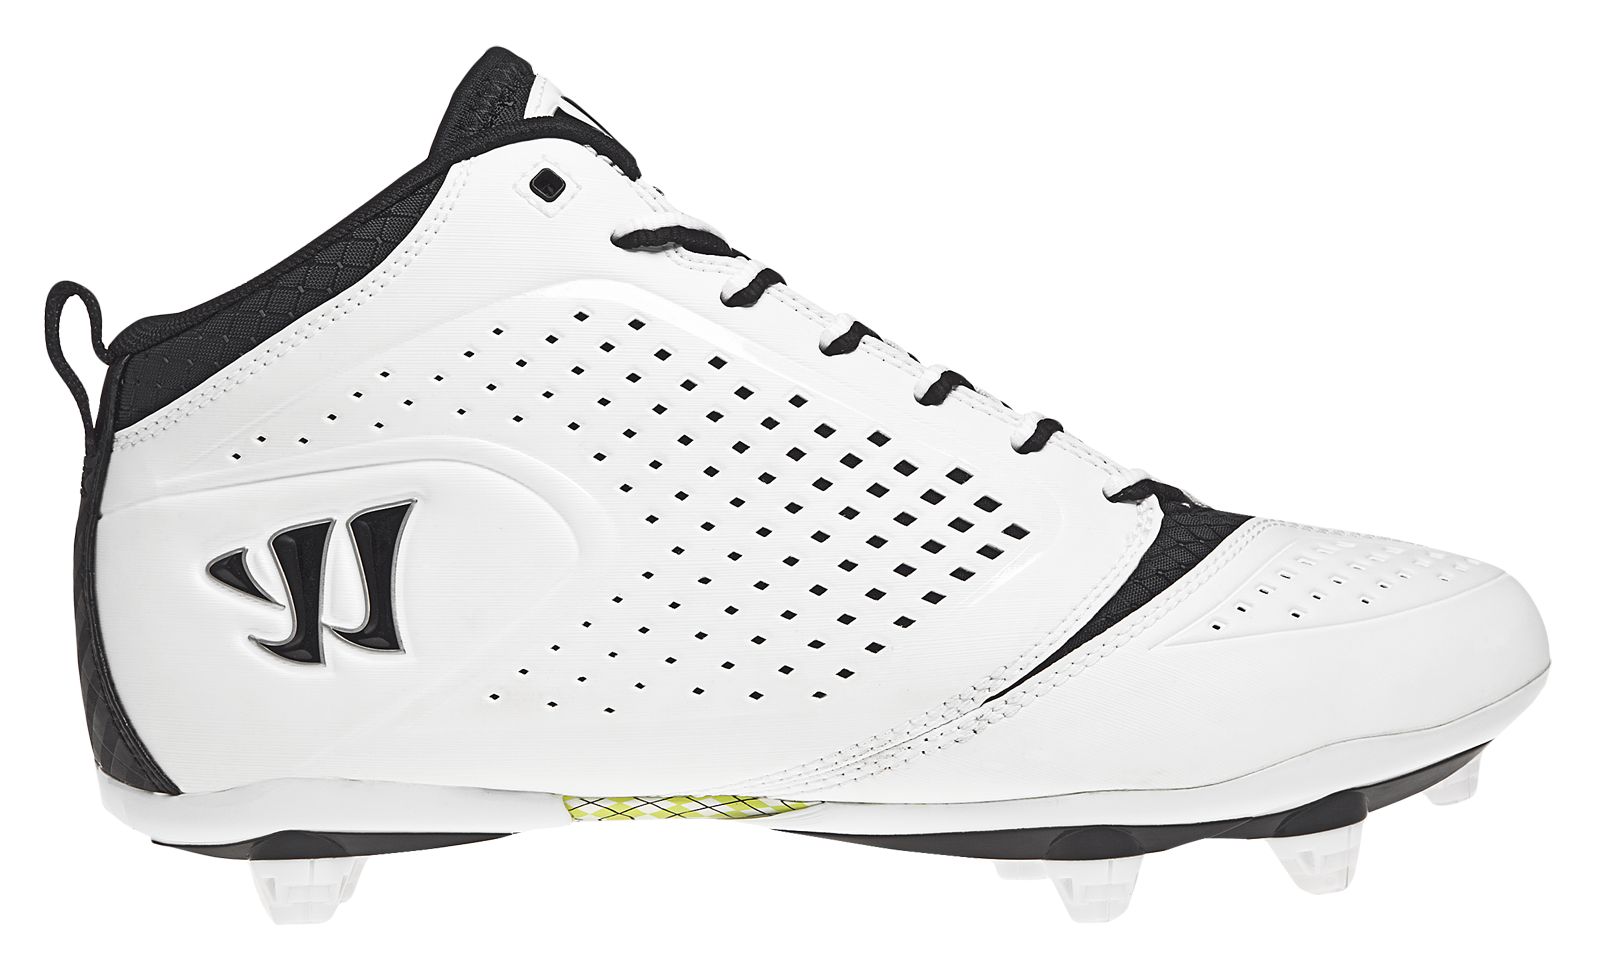 Burn Speed 5.0 Detach Cleat, White with Black image number 1